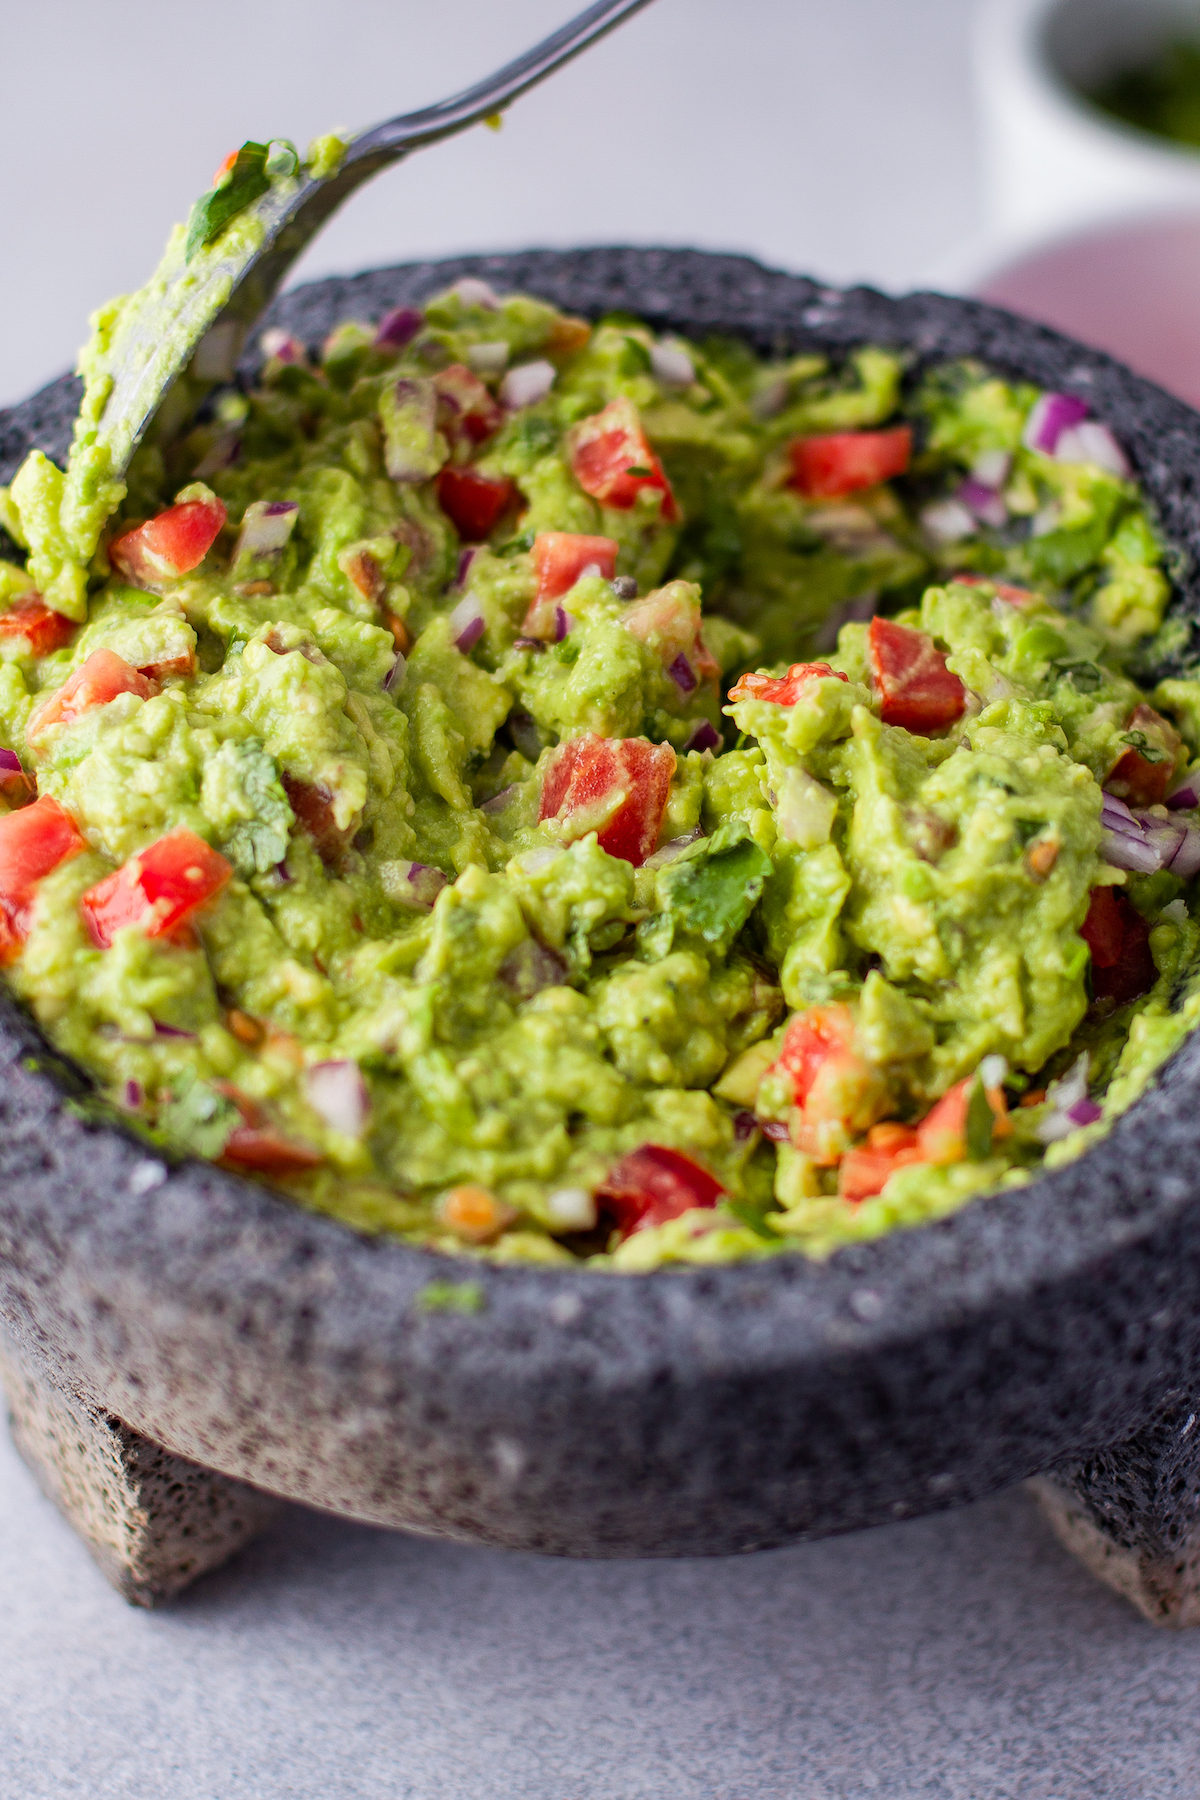 Authentic guacamole made with fresh avocados, tomatoes, and more.